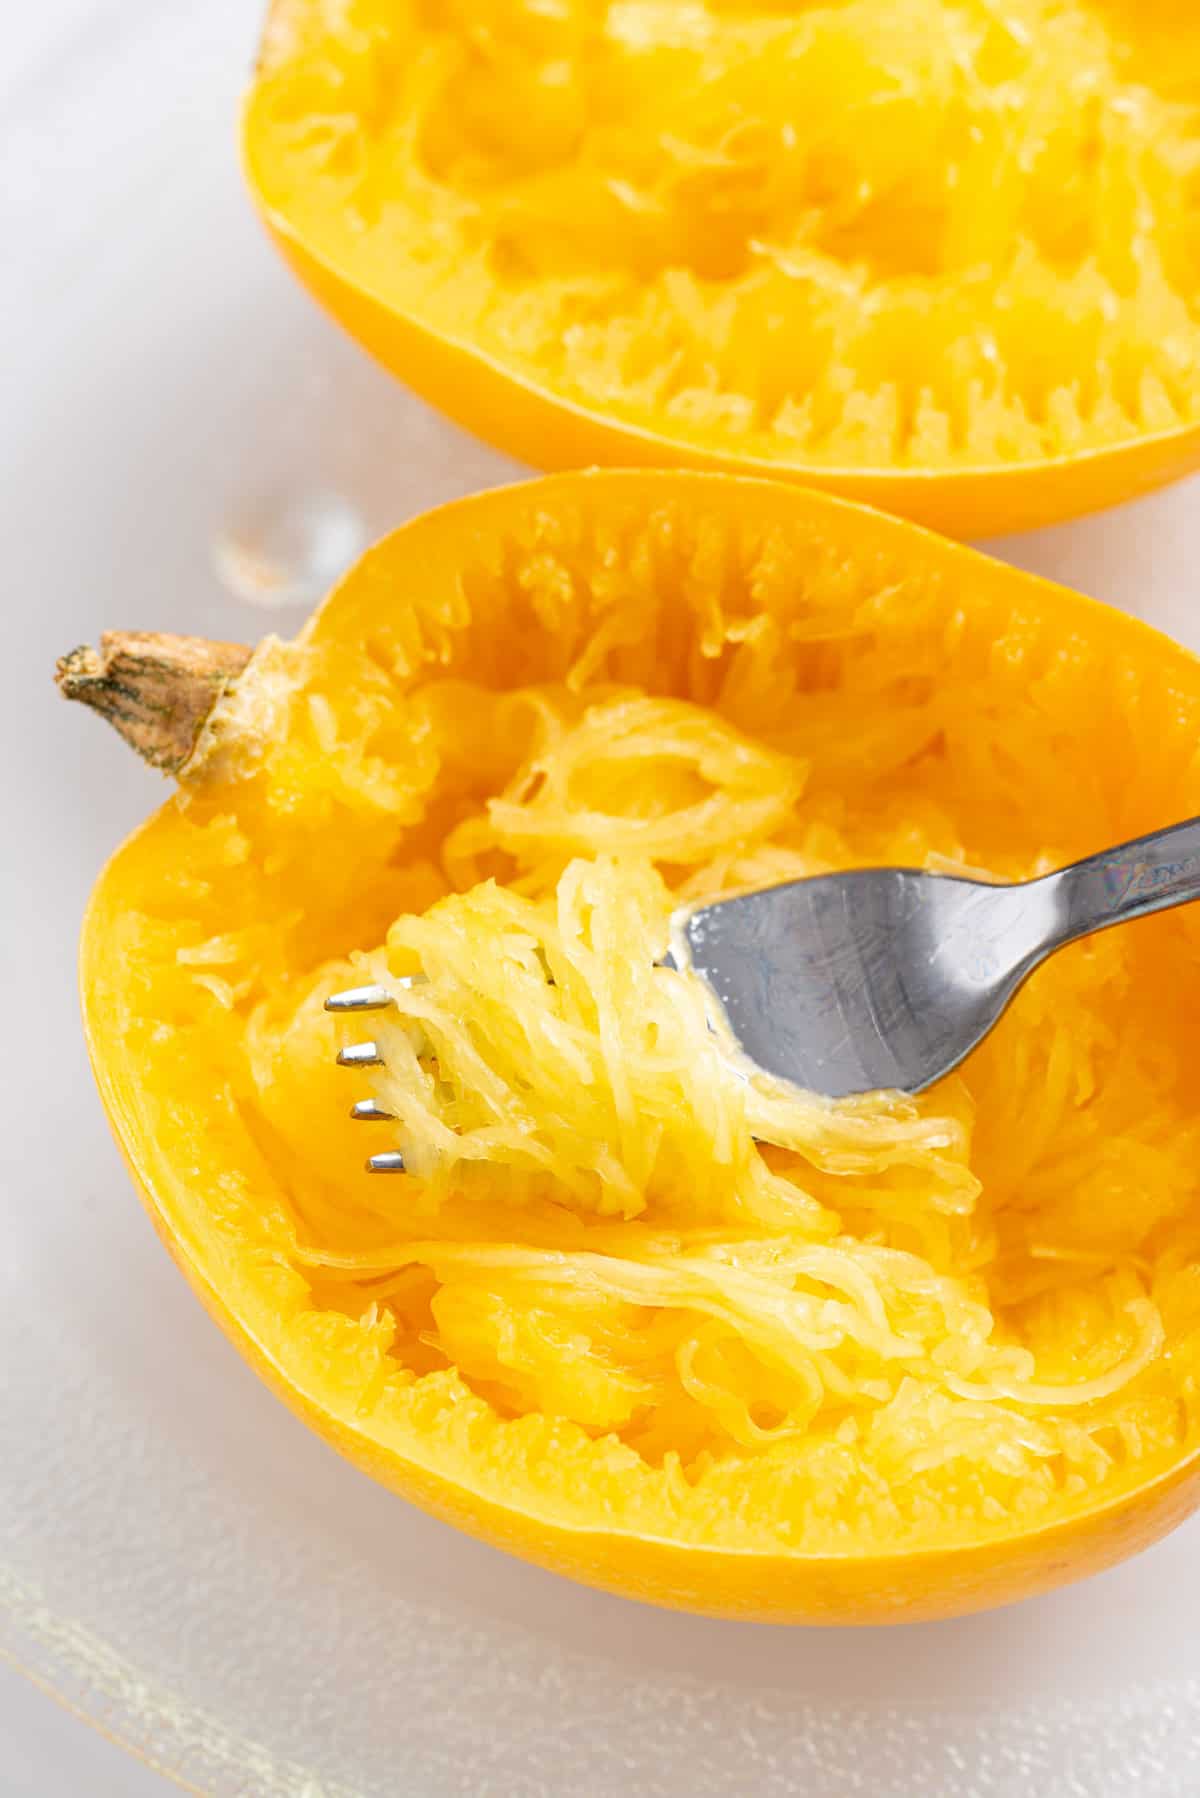 A close up image of spaghetti squash with strands shredded using a fork.